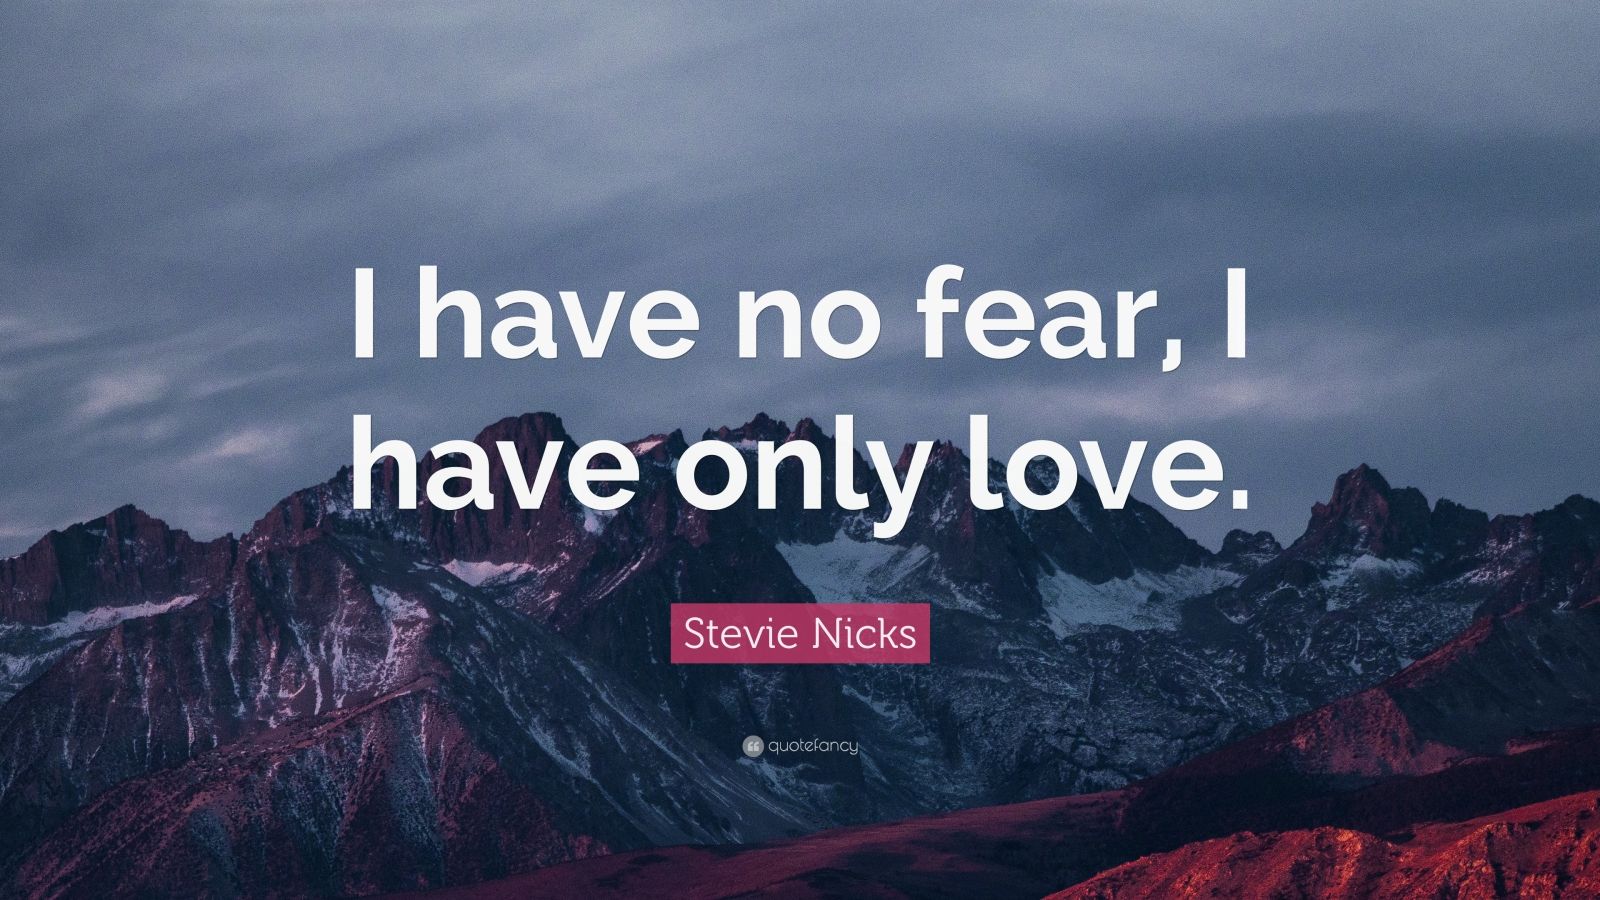 Stevie Nicks Quote “I have no fear, I have only love.” (9